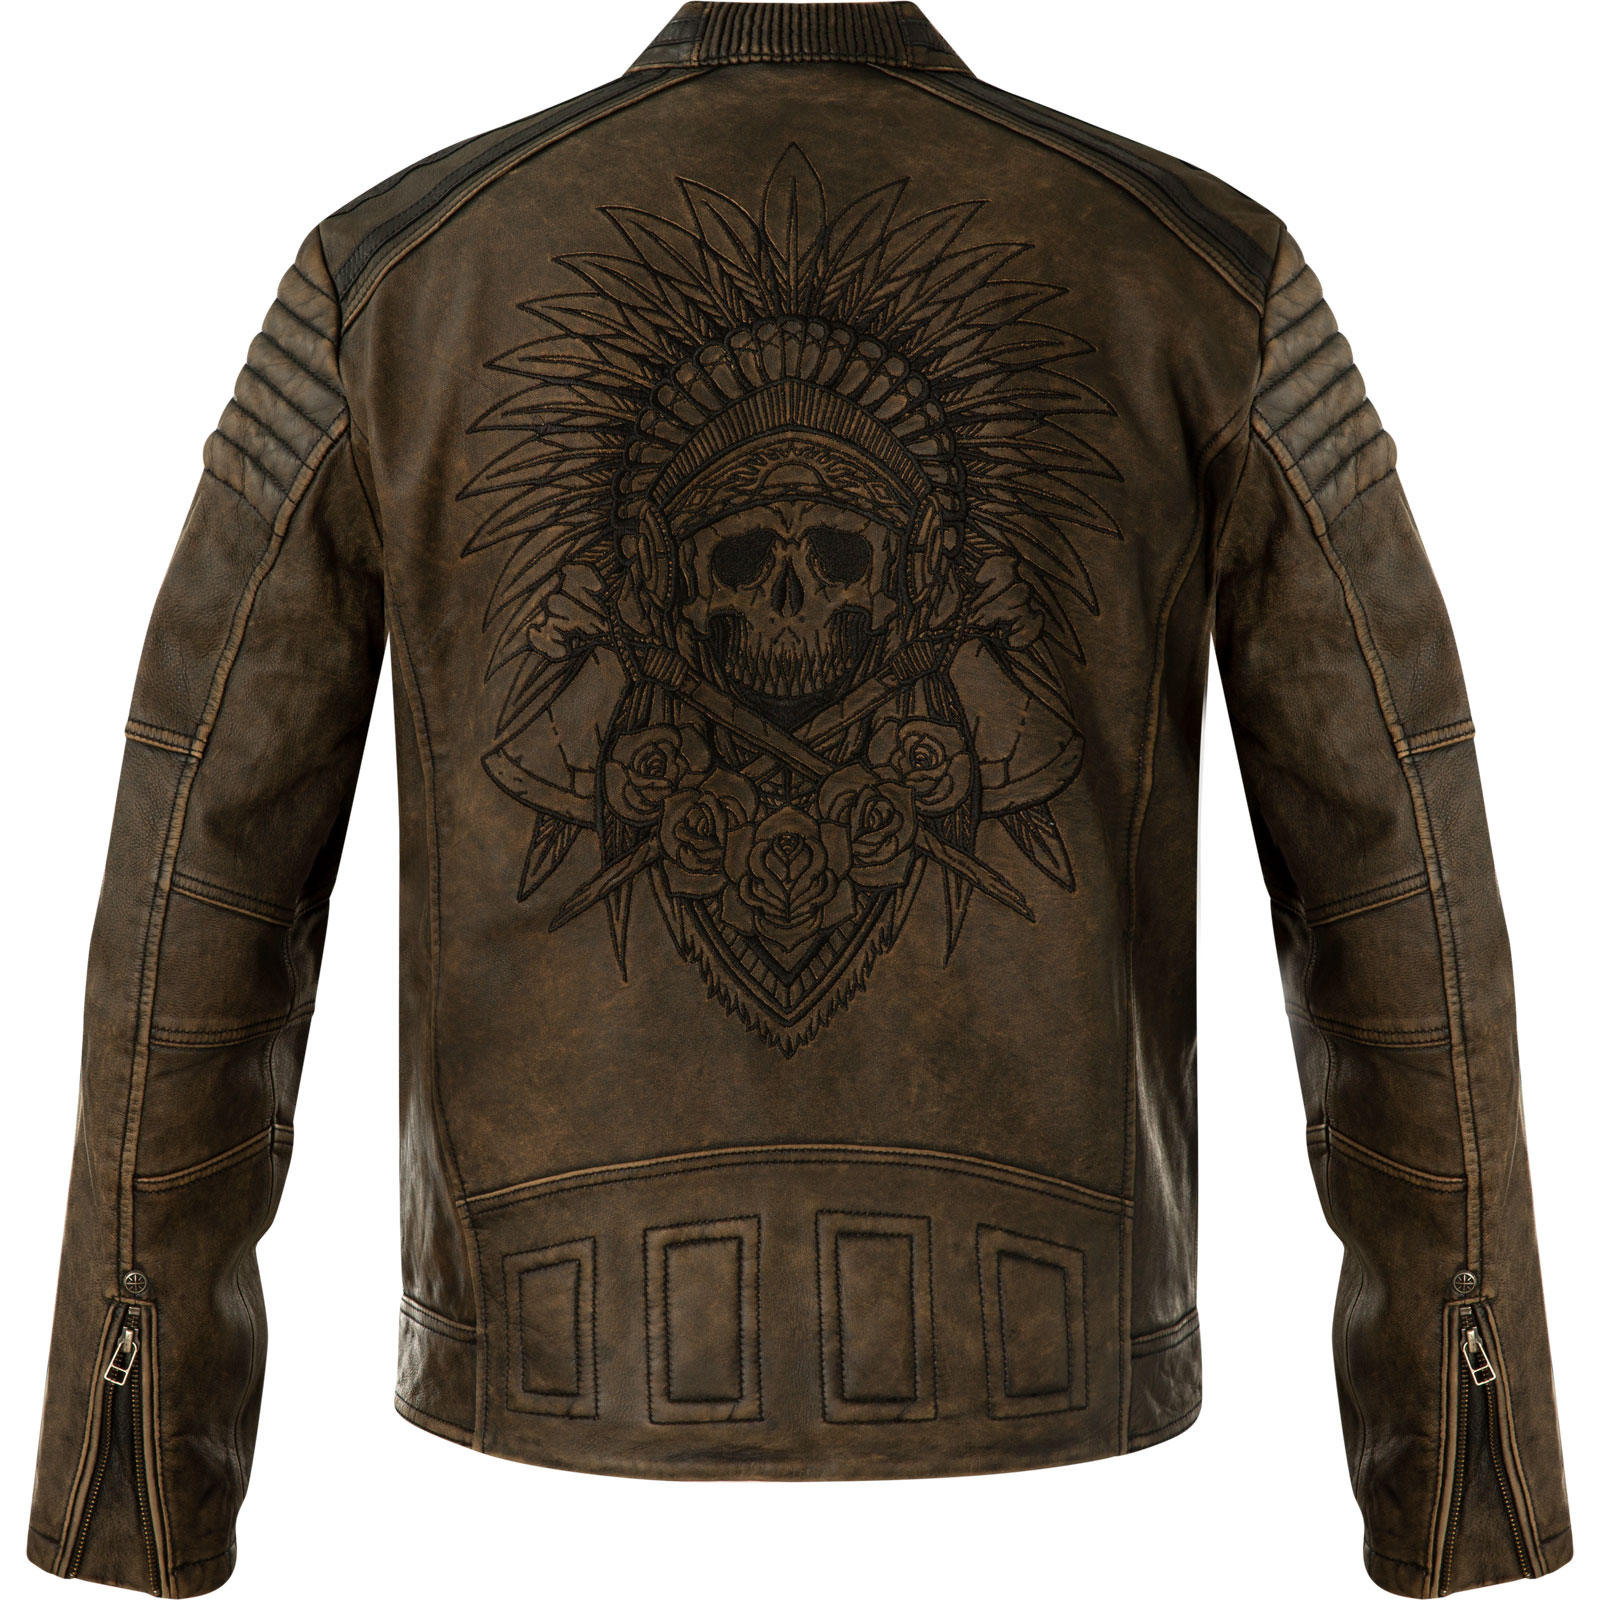 Affliction Affinity jacket in biker style made from genuine leather